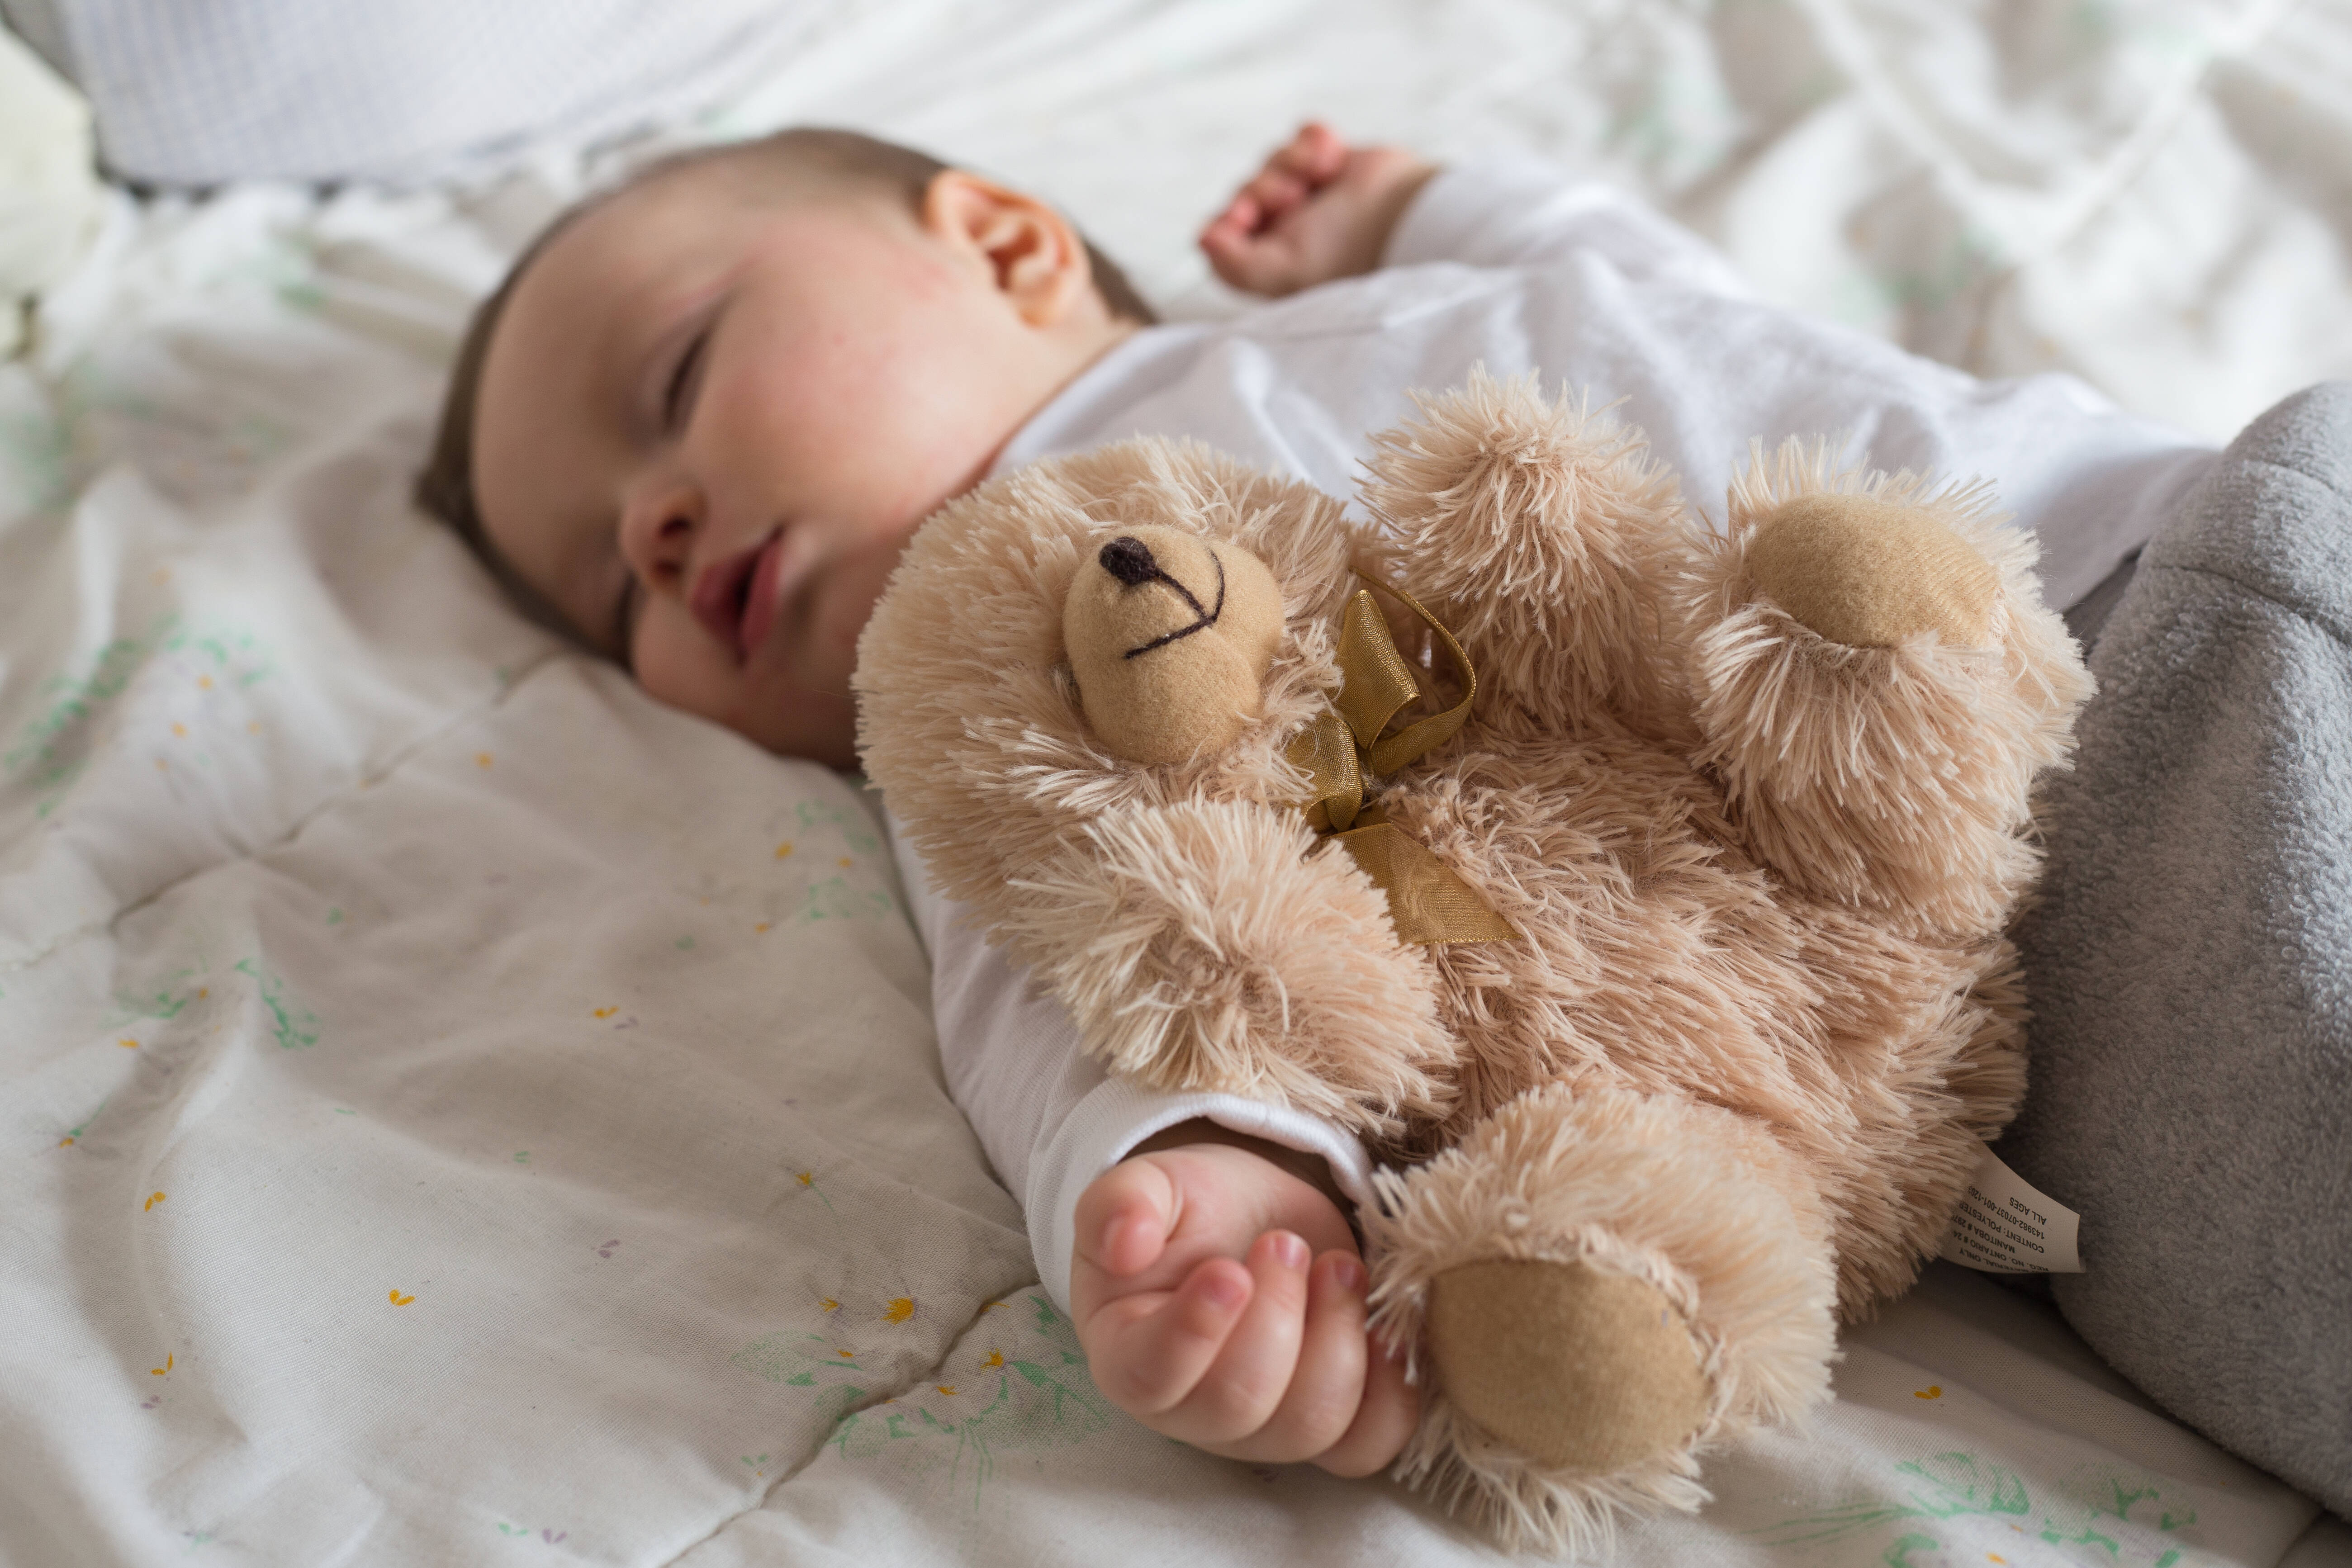 Baby sleeping in bed with a teddy bear